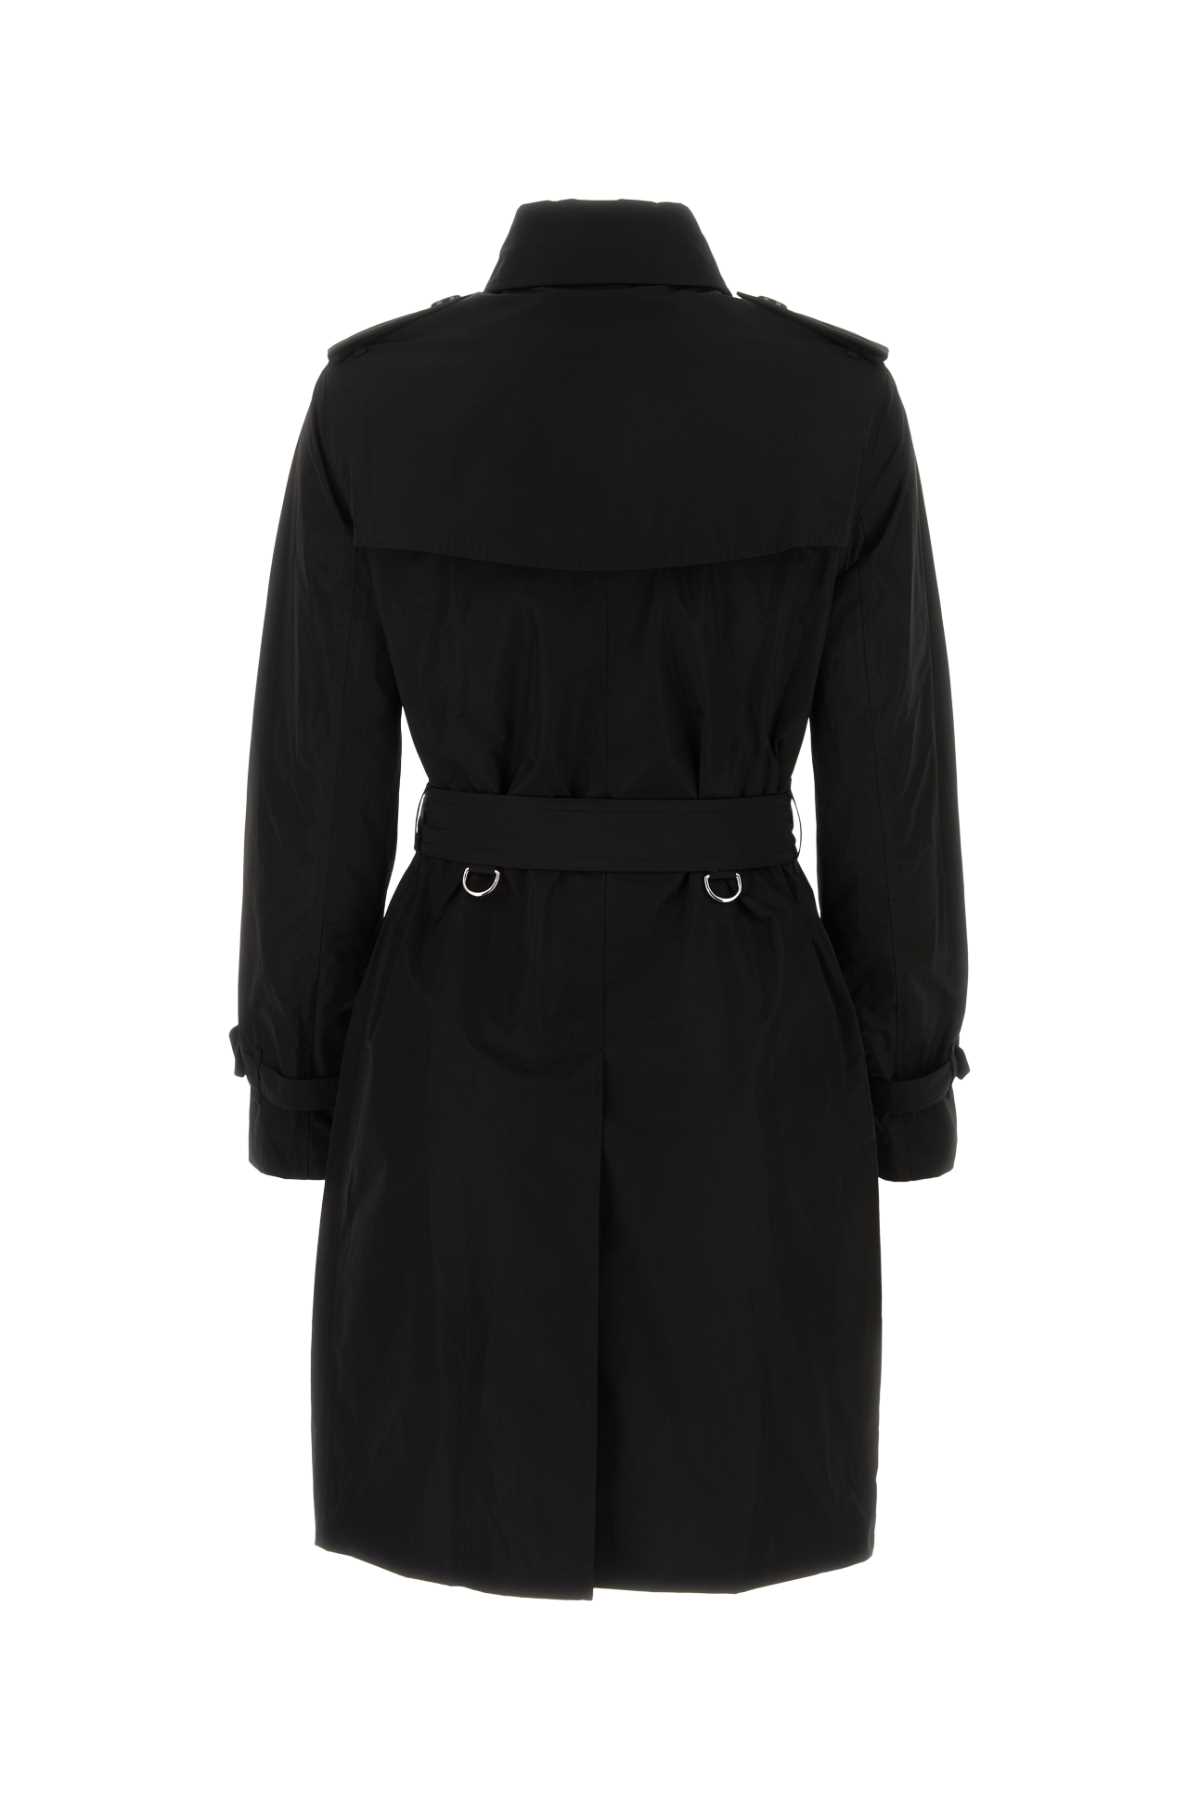 Shop Burberry Black Polyester Trench Coat